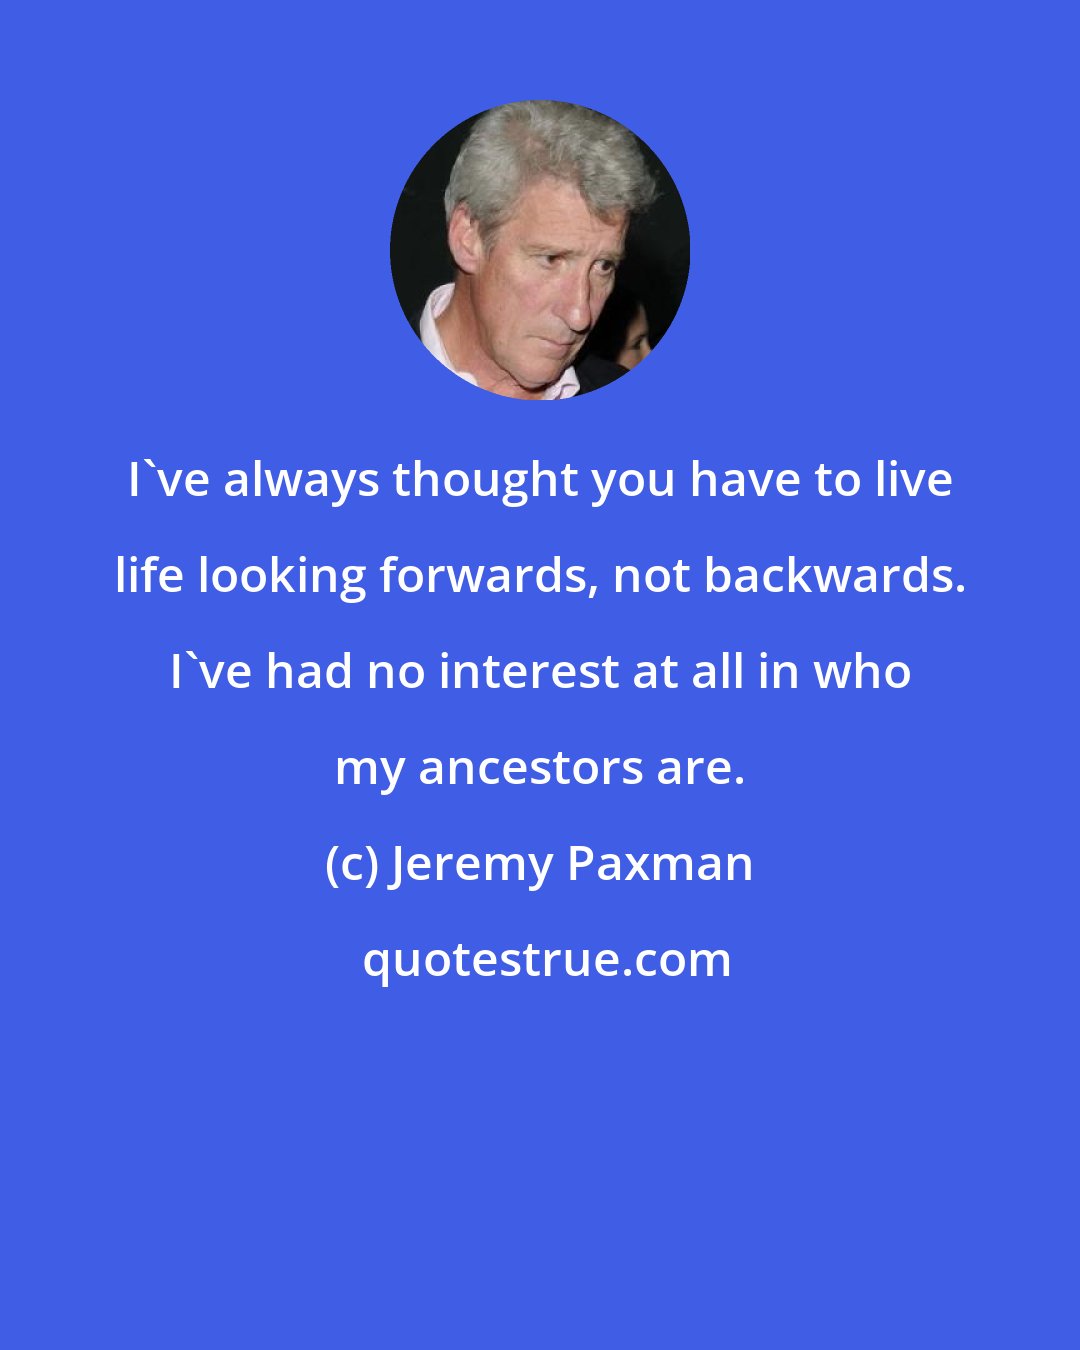 Jeremy Paxman: I've always thought you have to live life looking forwards, not backwards. I've had no interest at all in who my ancestors are.